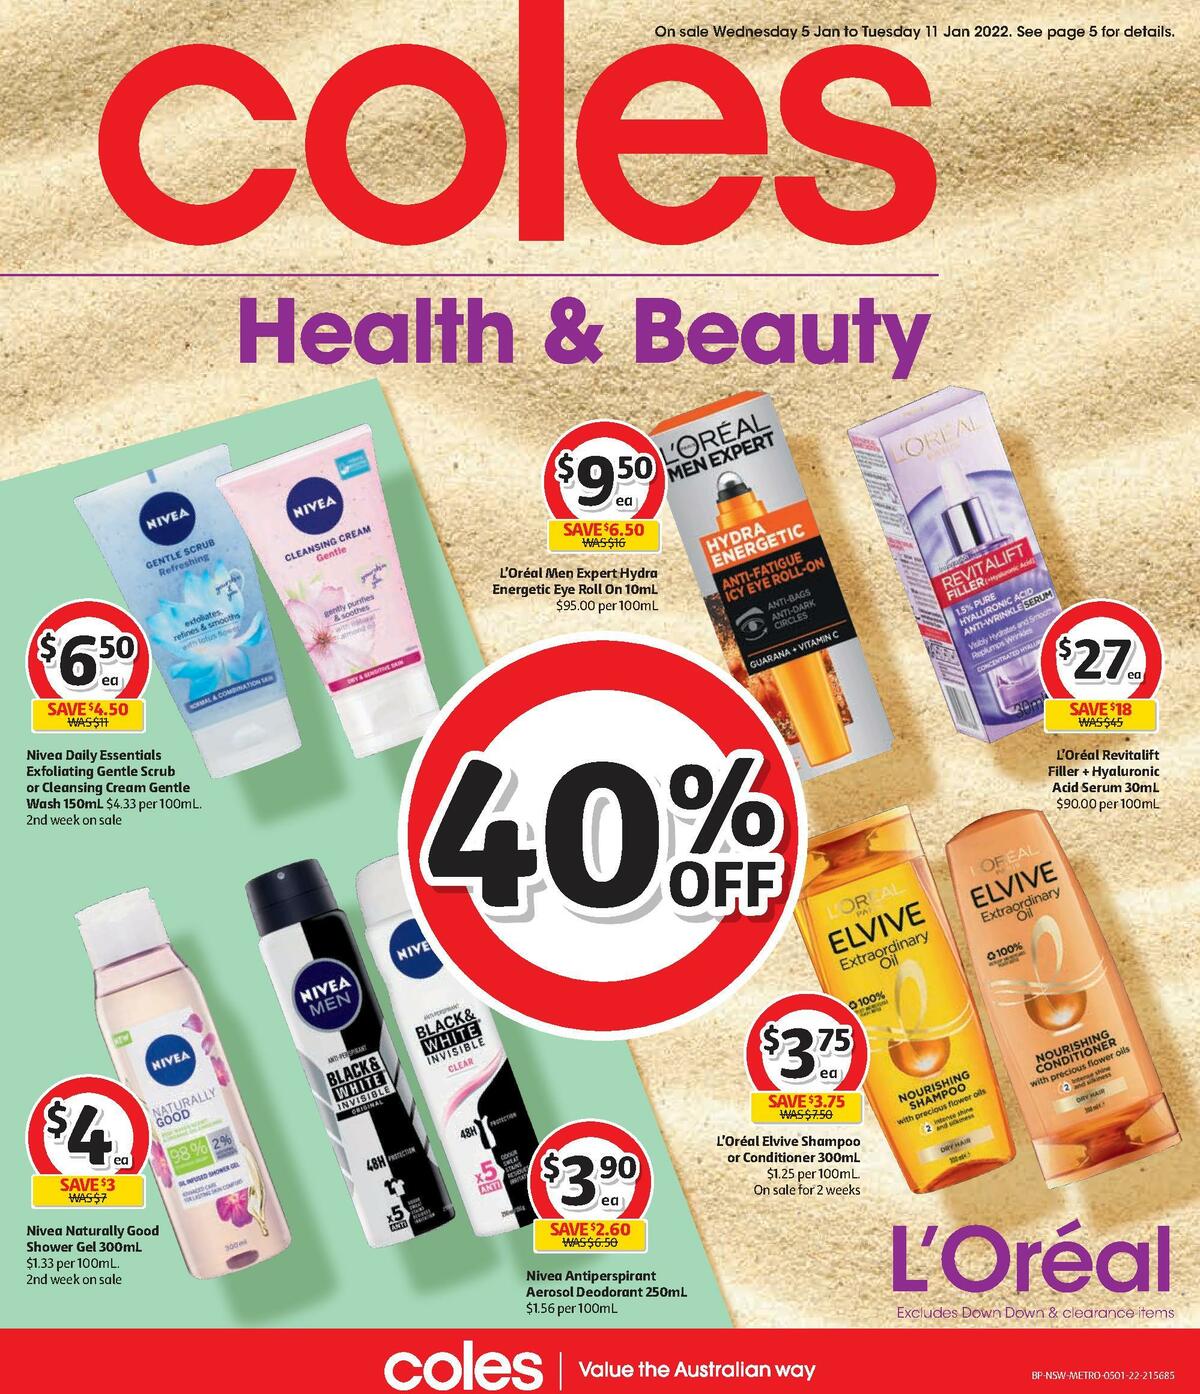 Coles Health & Beauty Catalogues from 5 January